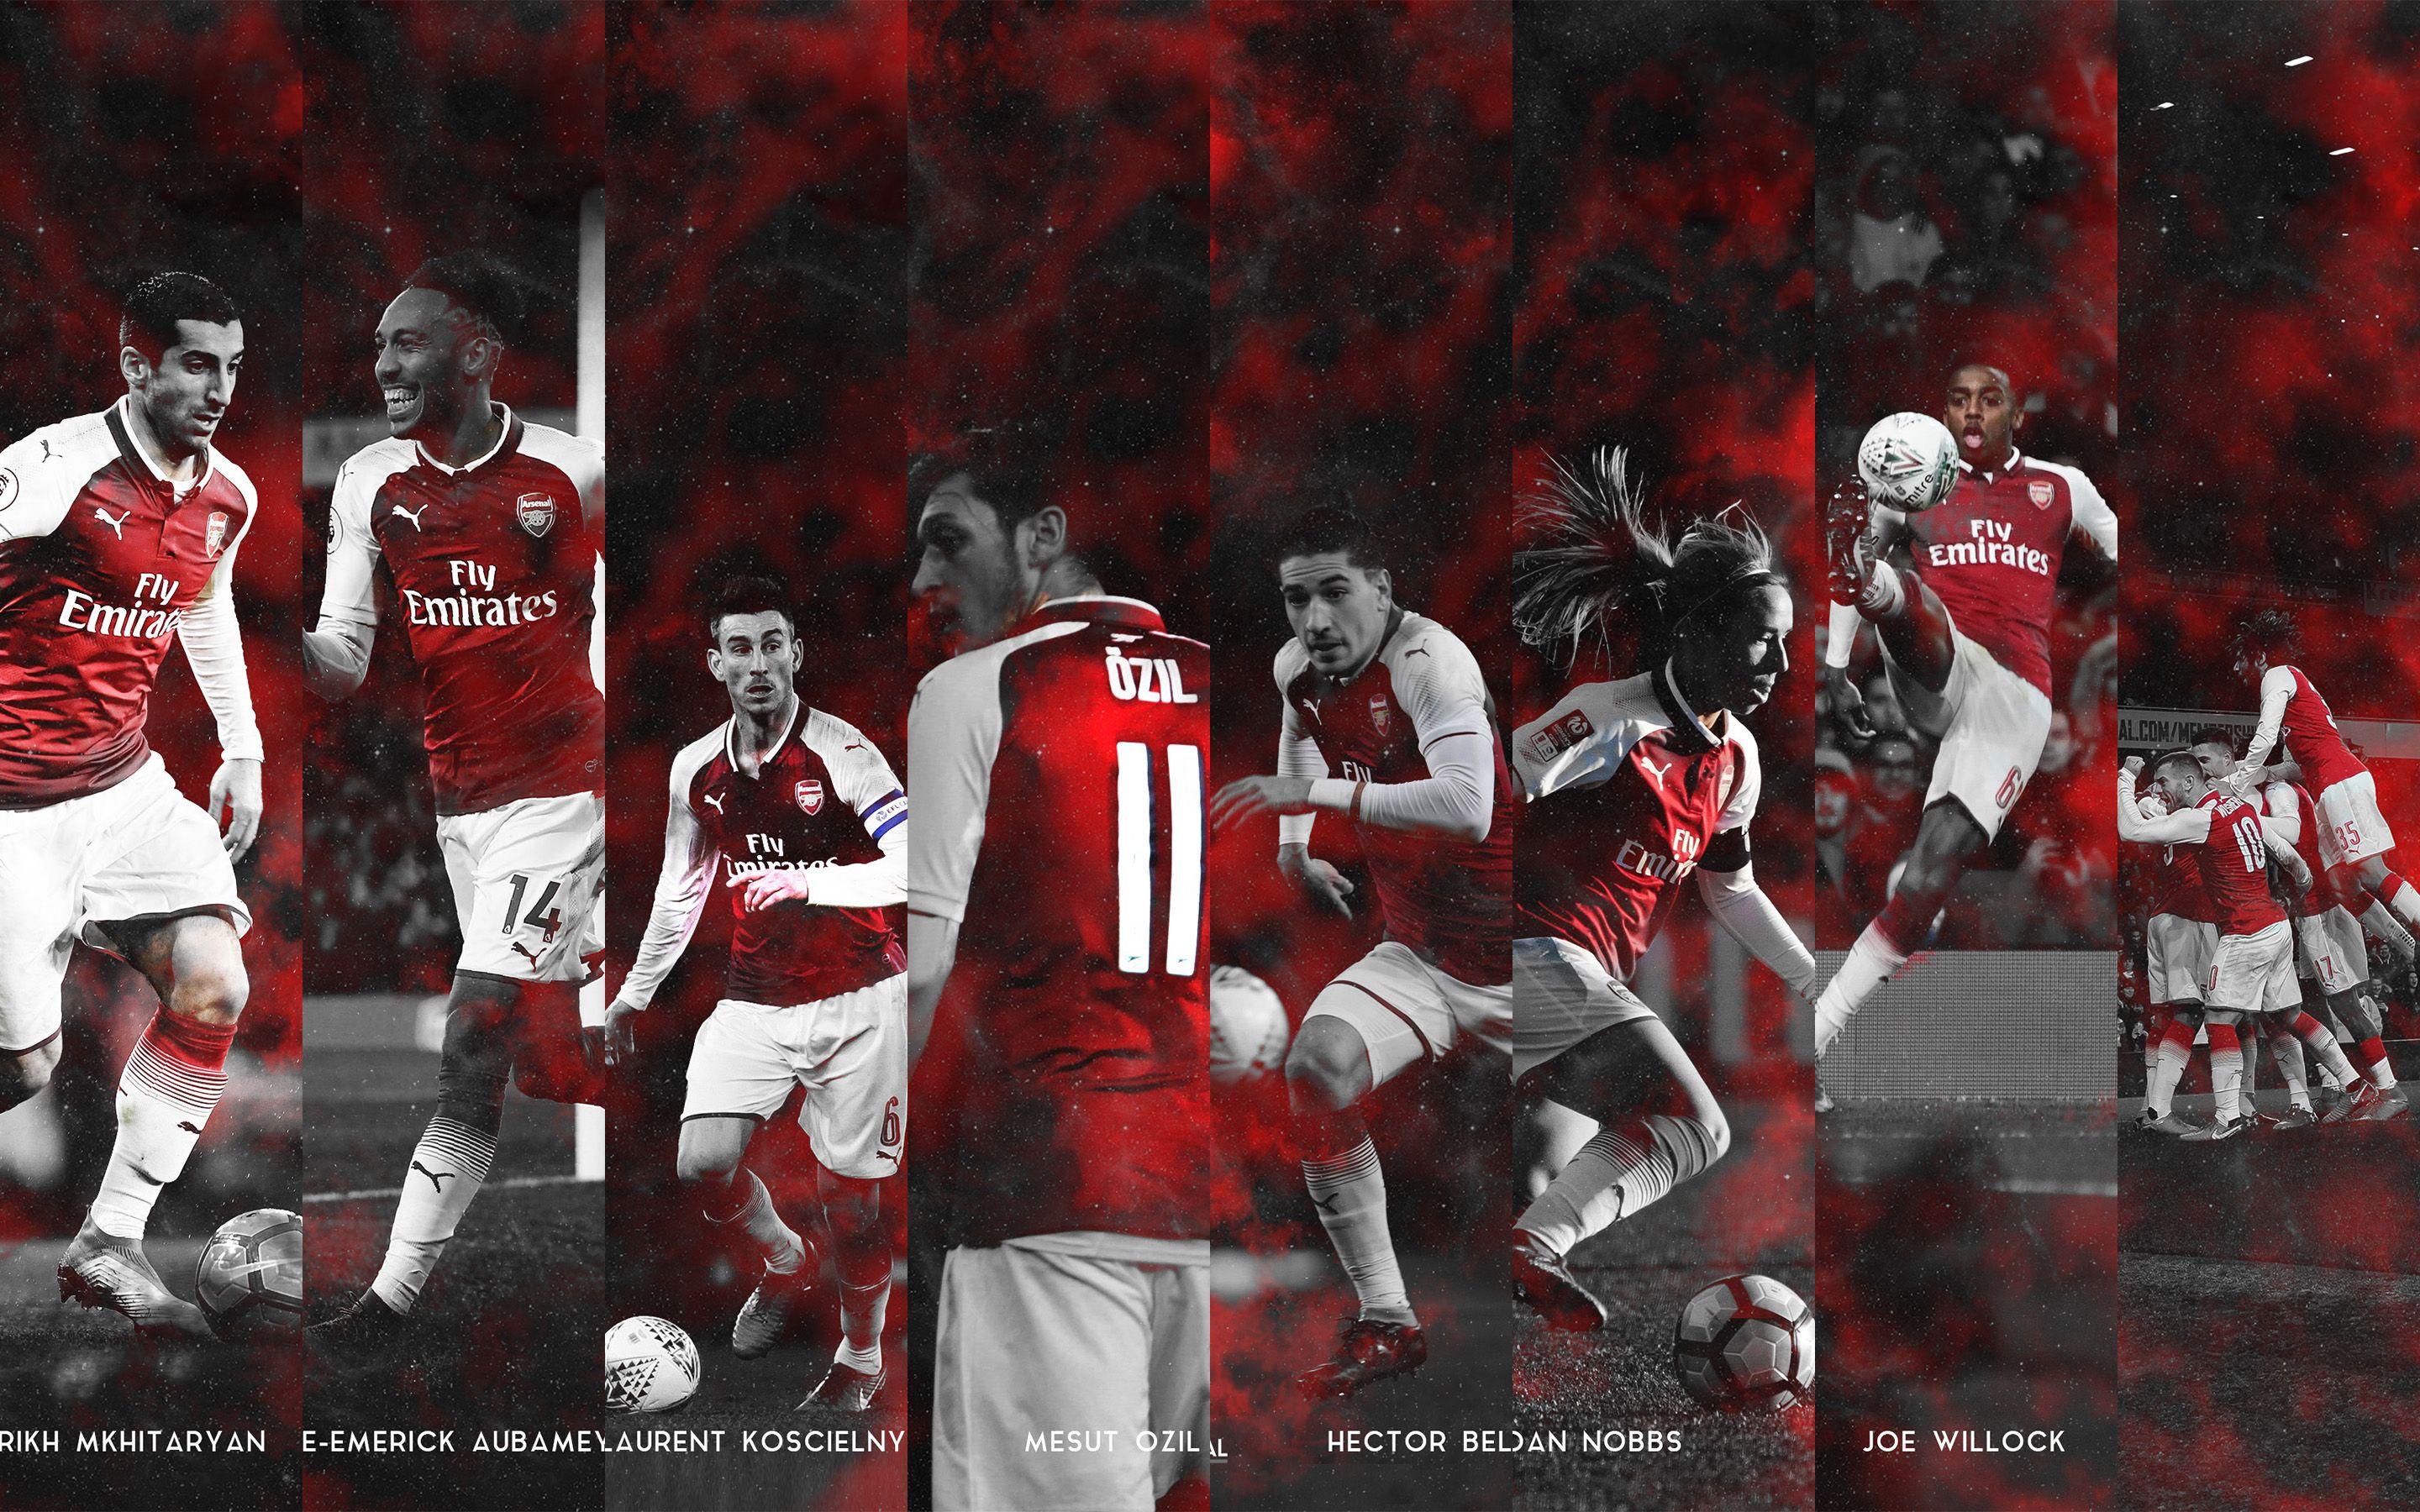 Amazing Arsenal phone wallpaper collaboration with Humans Of